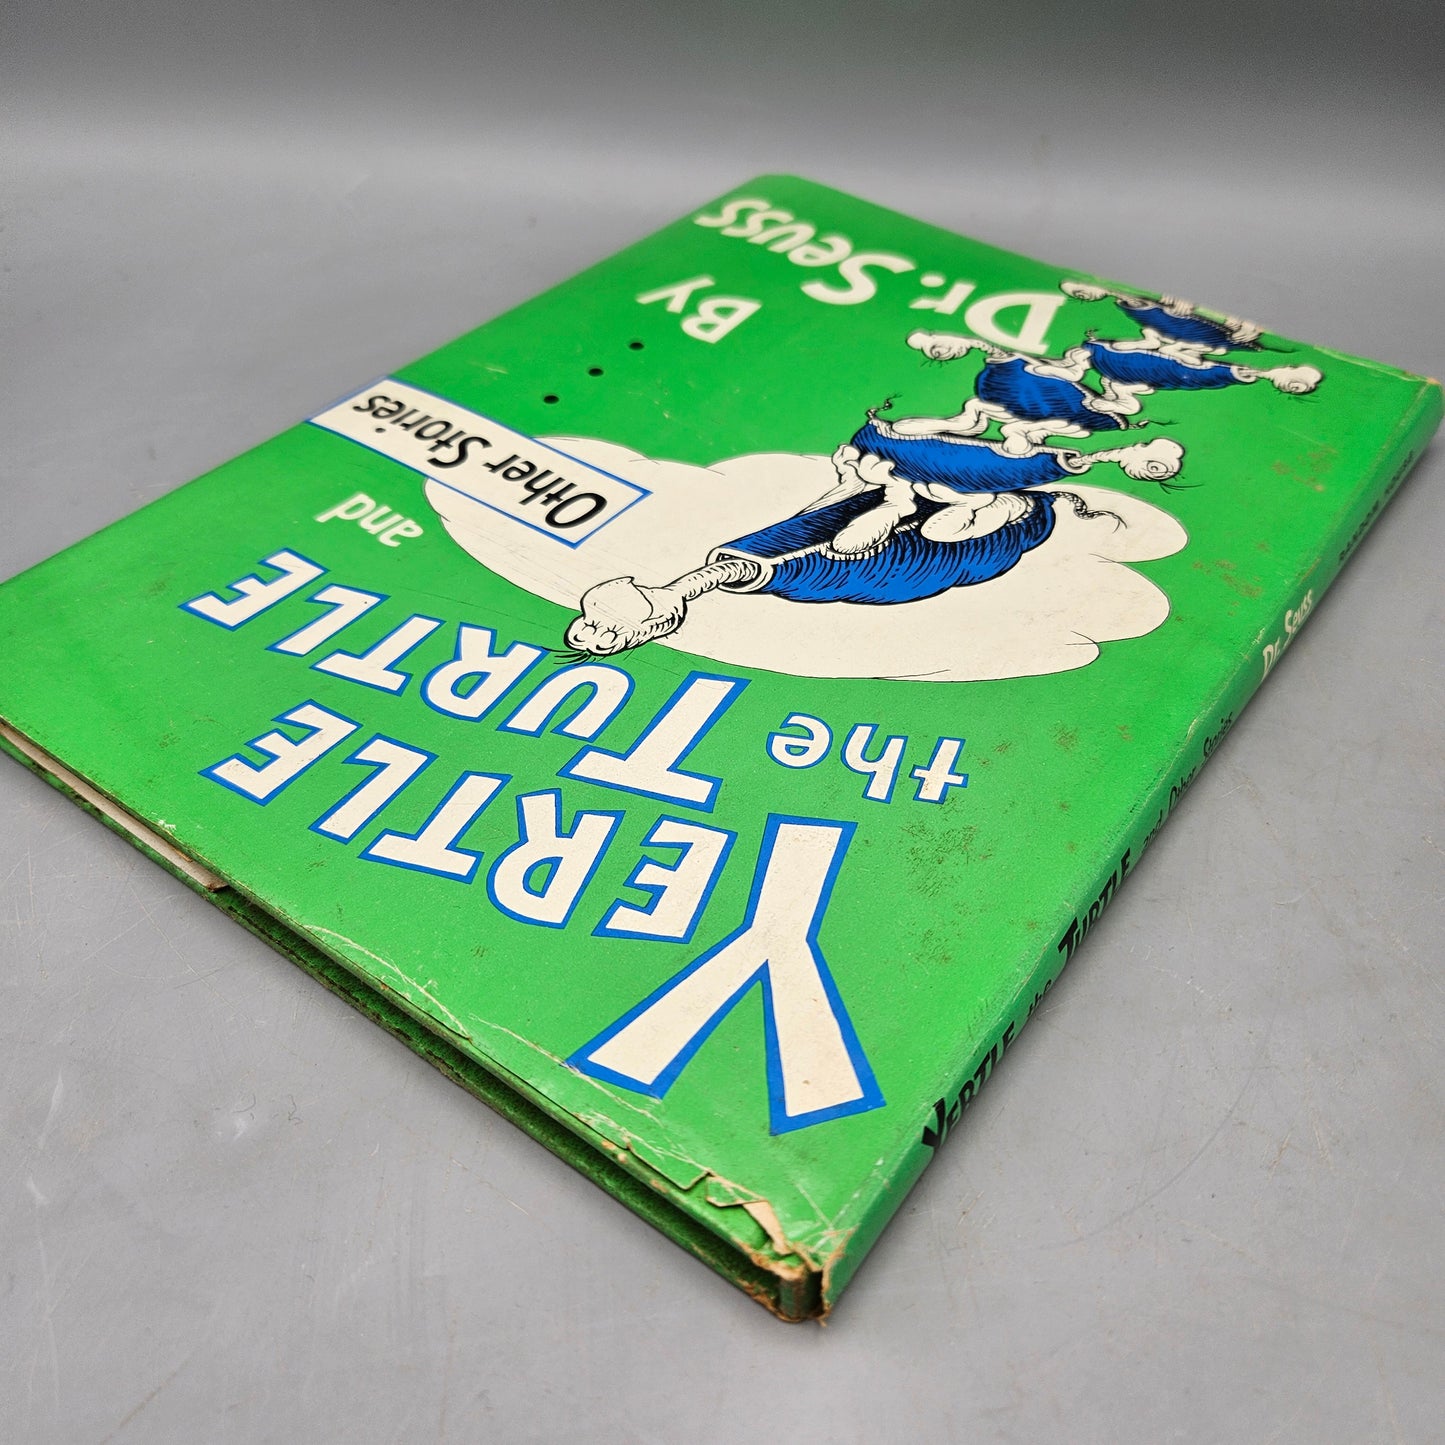 Book: 1958 1st Edition Yertle The Turtle and Other Stories by Dr. Seuss ~ Published by Random House, NY